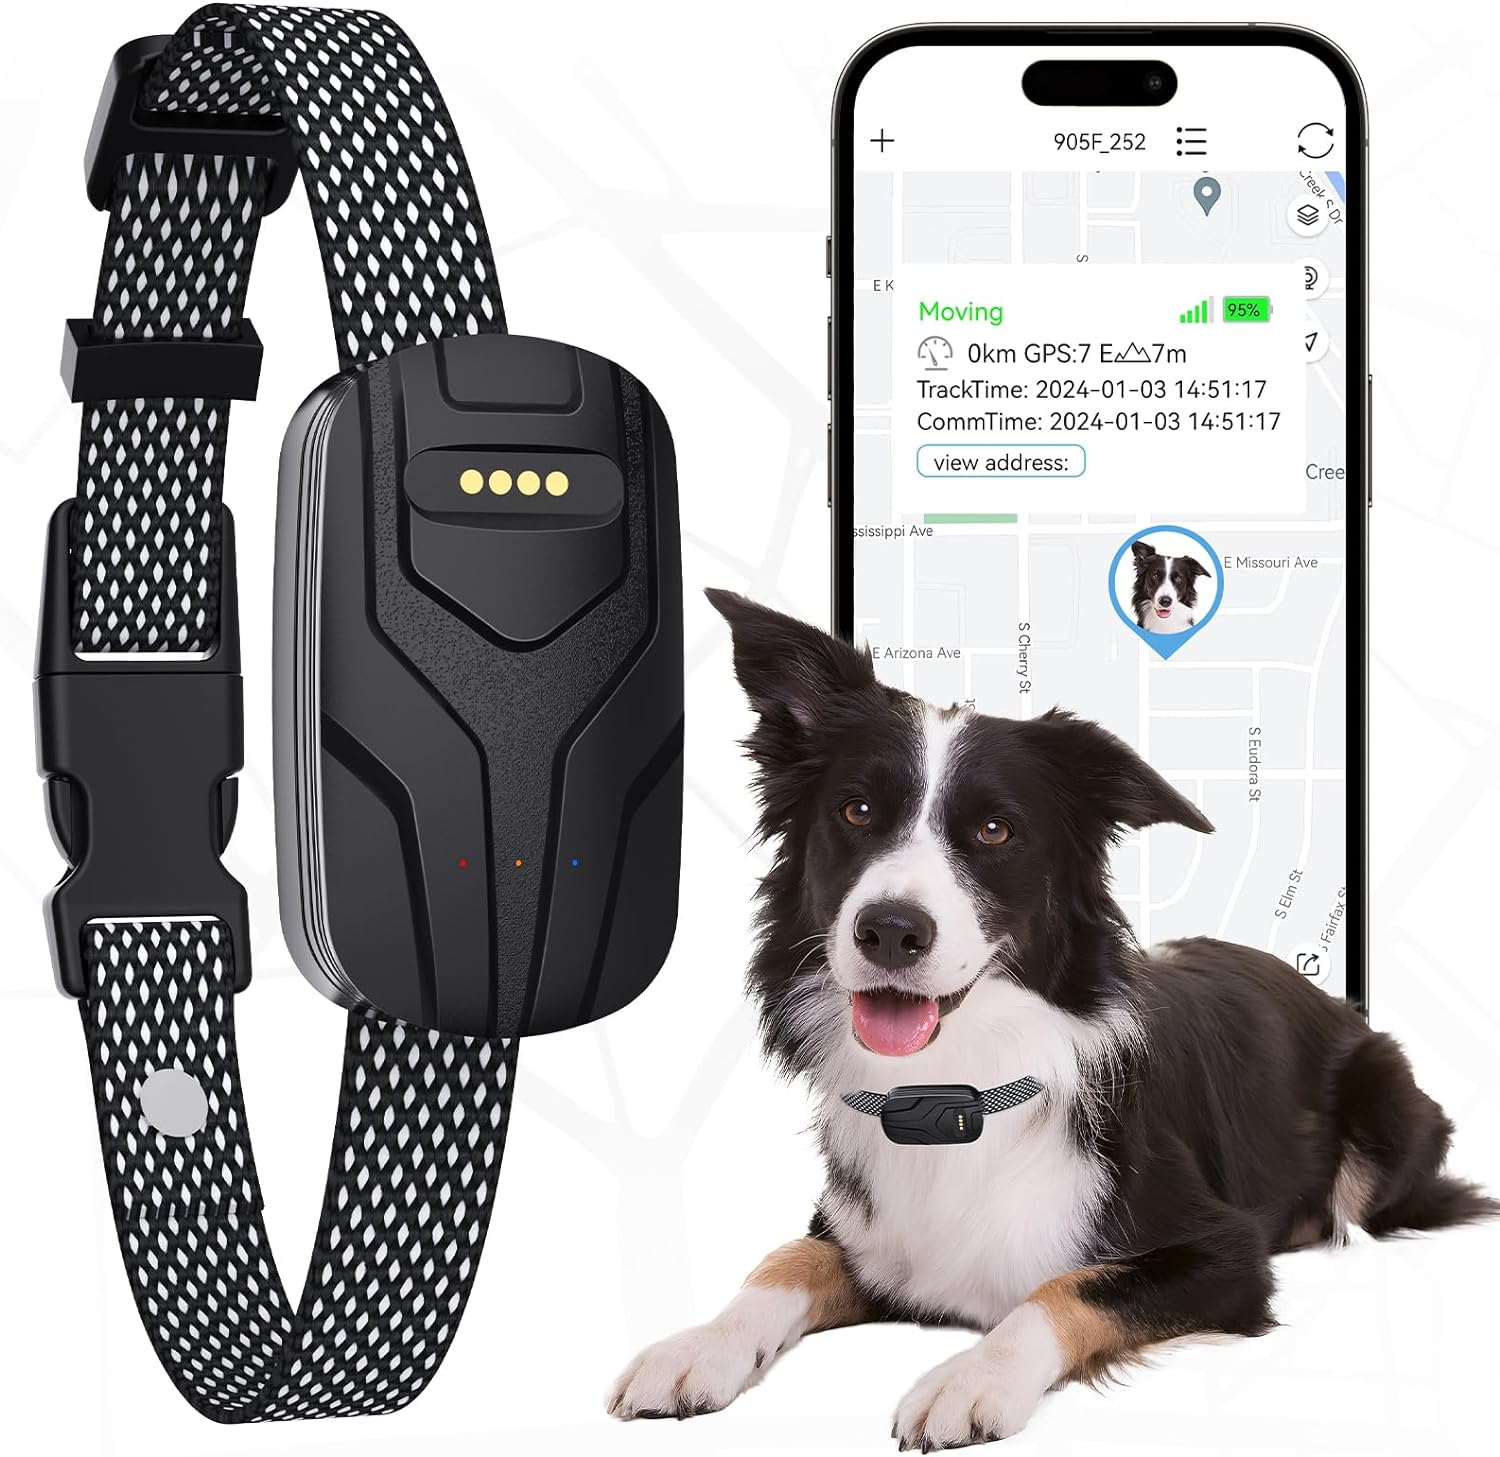 GPS Dog Tracker with Activity Monitoring